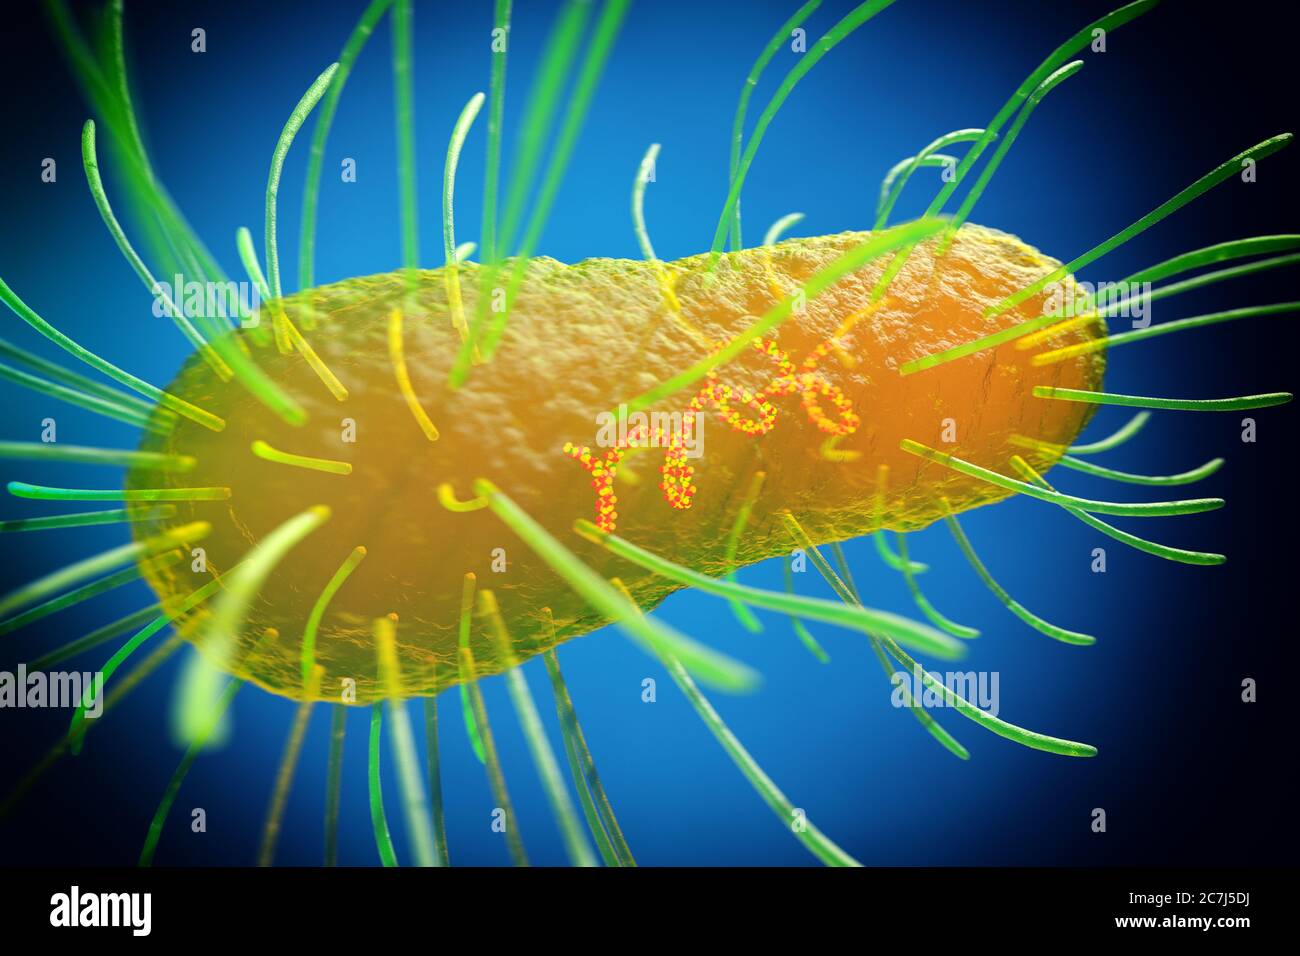 E Coli Bacteria Illustration Escherichia Coli Is A Rod Shaped Bacterium Bacillus Its Cell Membrane Is Covered In Fine Filaments Called Pili Or Fimbriae Hair Like Structures Called Flagella At The Rear Of Each